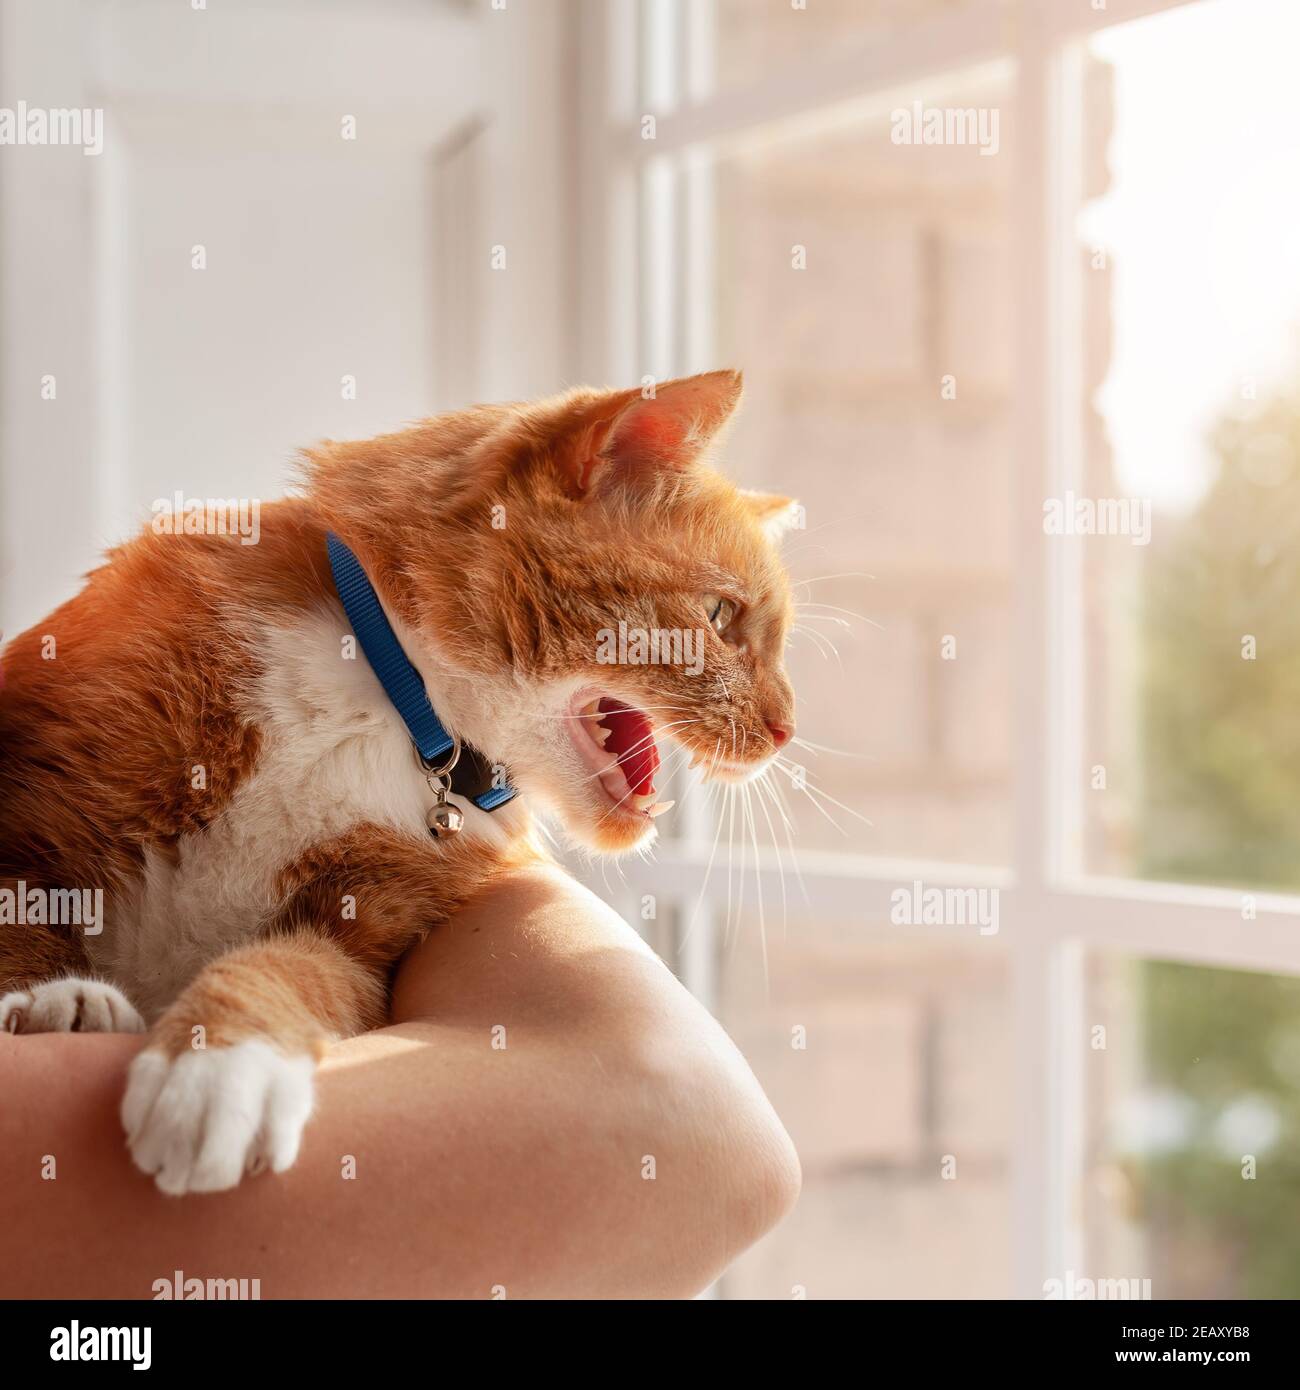 Angry meow cat stock photo. Image of life, beautiful, expression